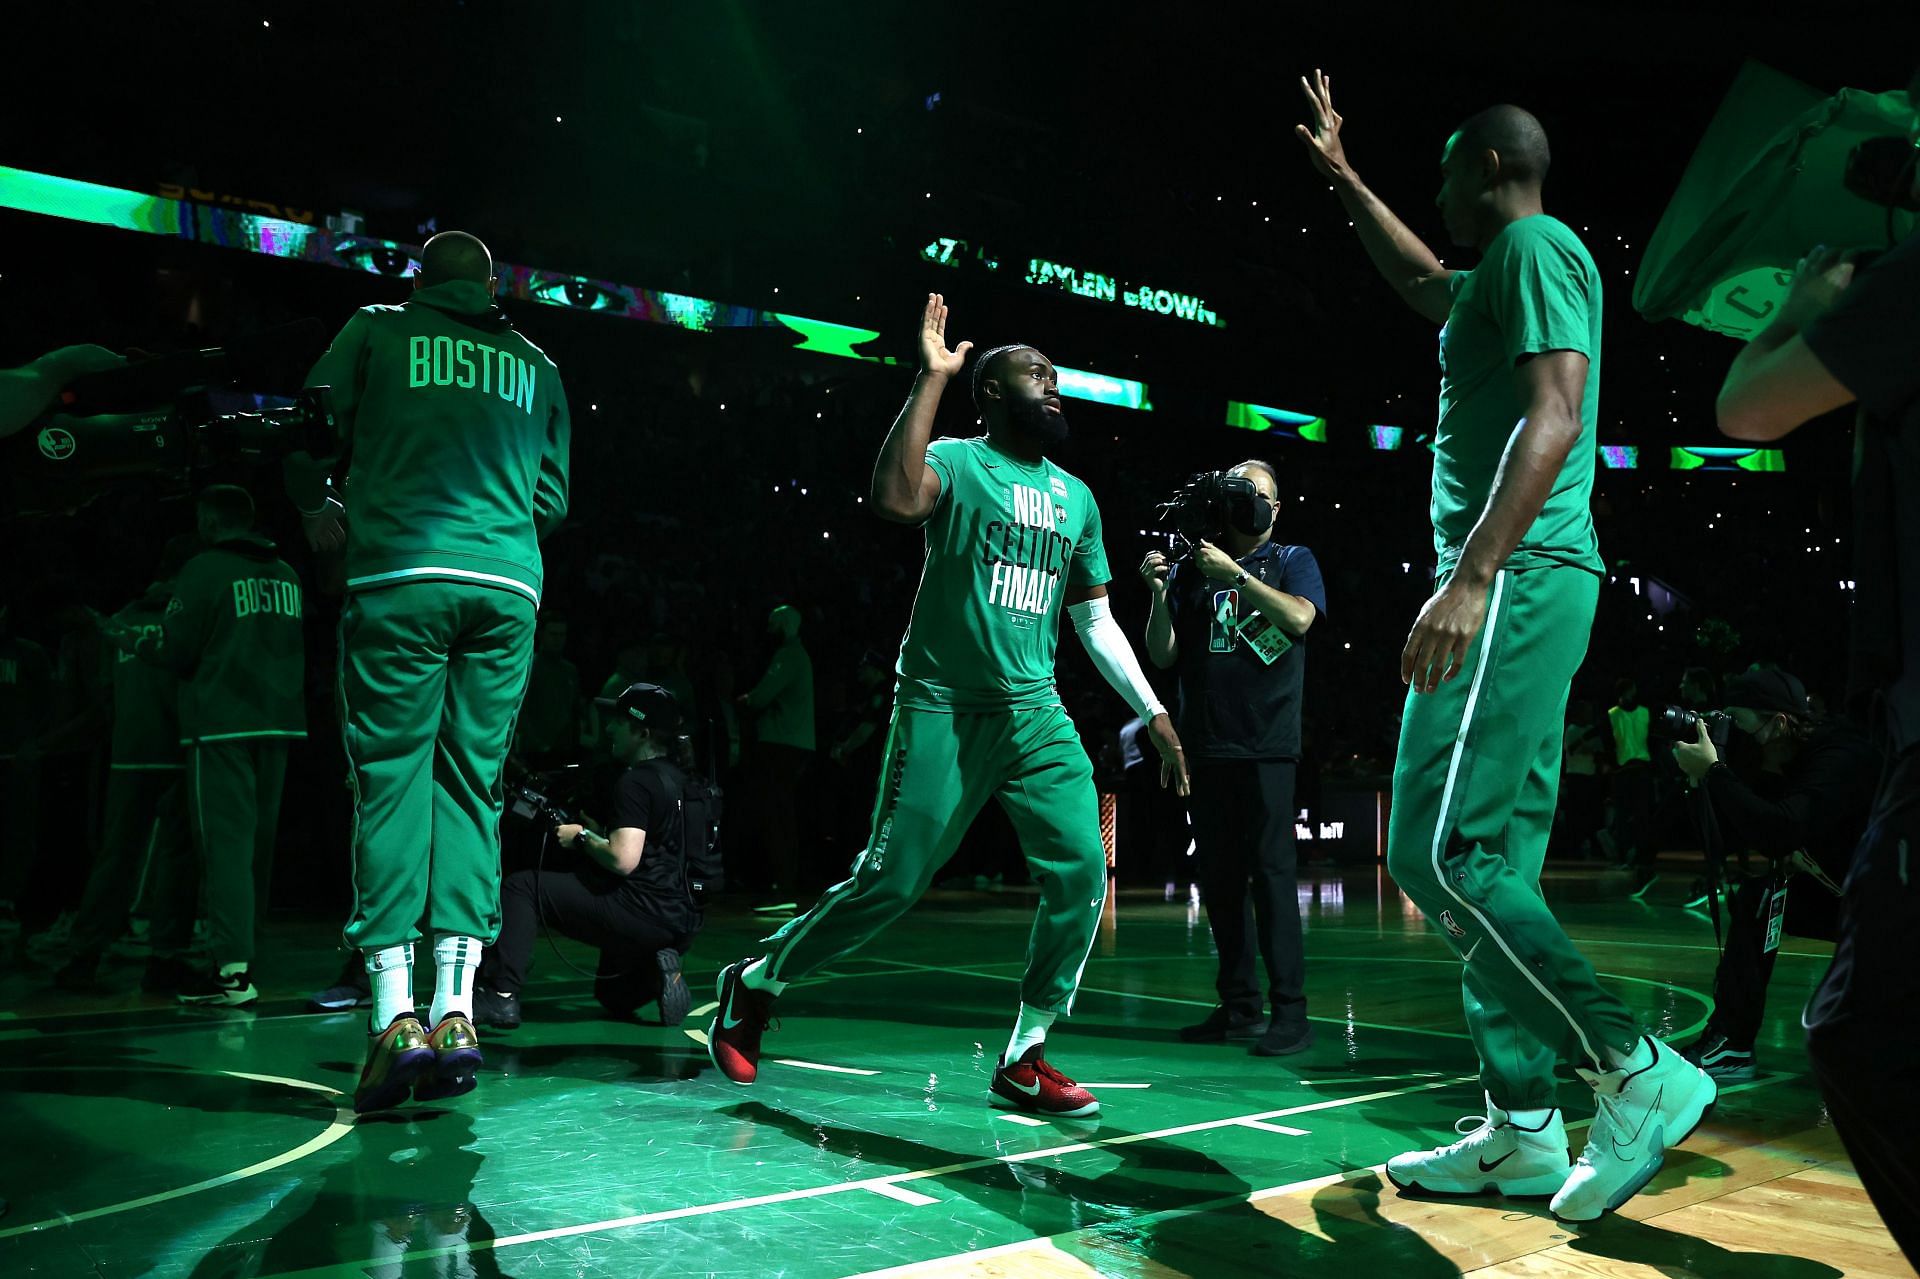 Boston Celtics during the introduction of Game Three in the NBA Finals